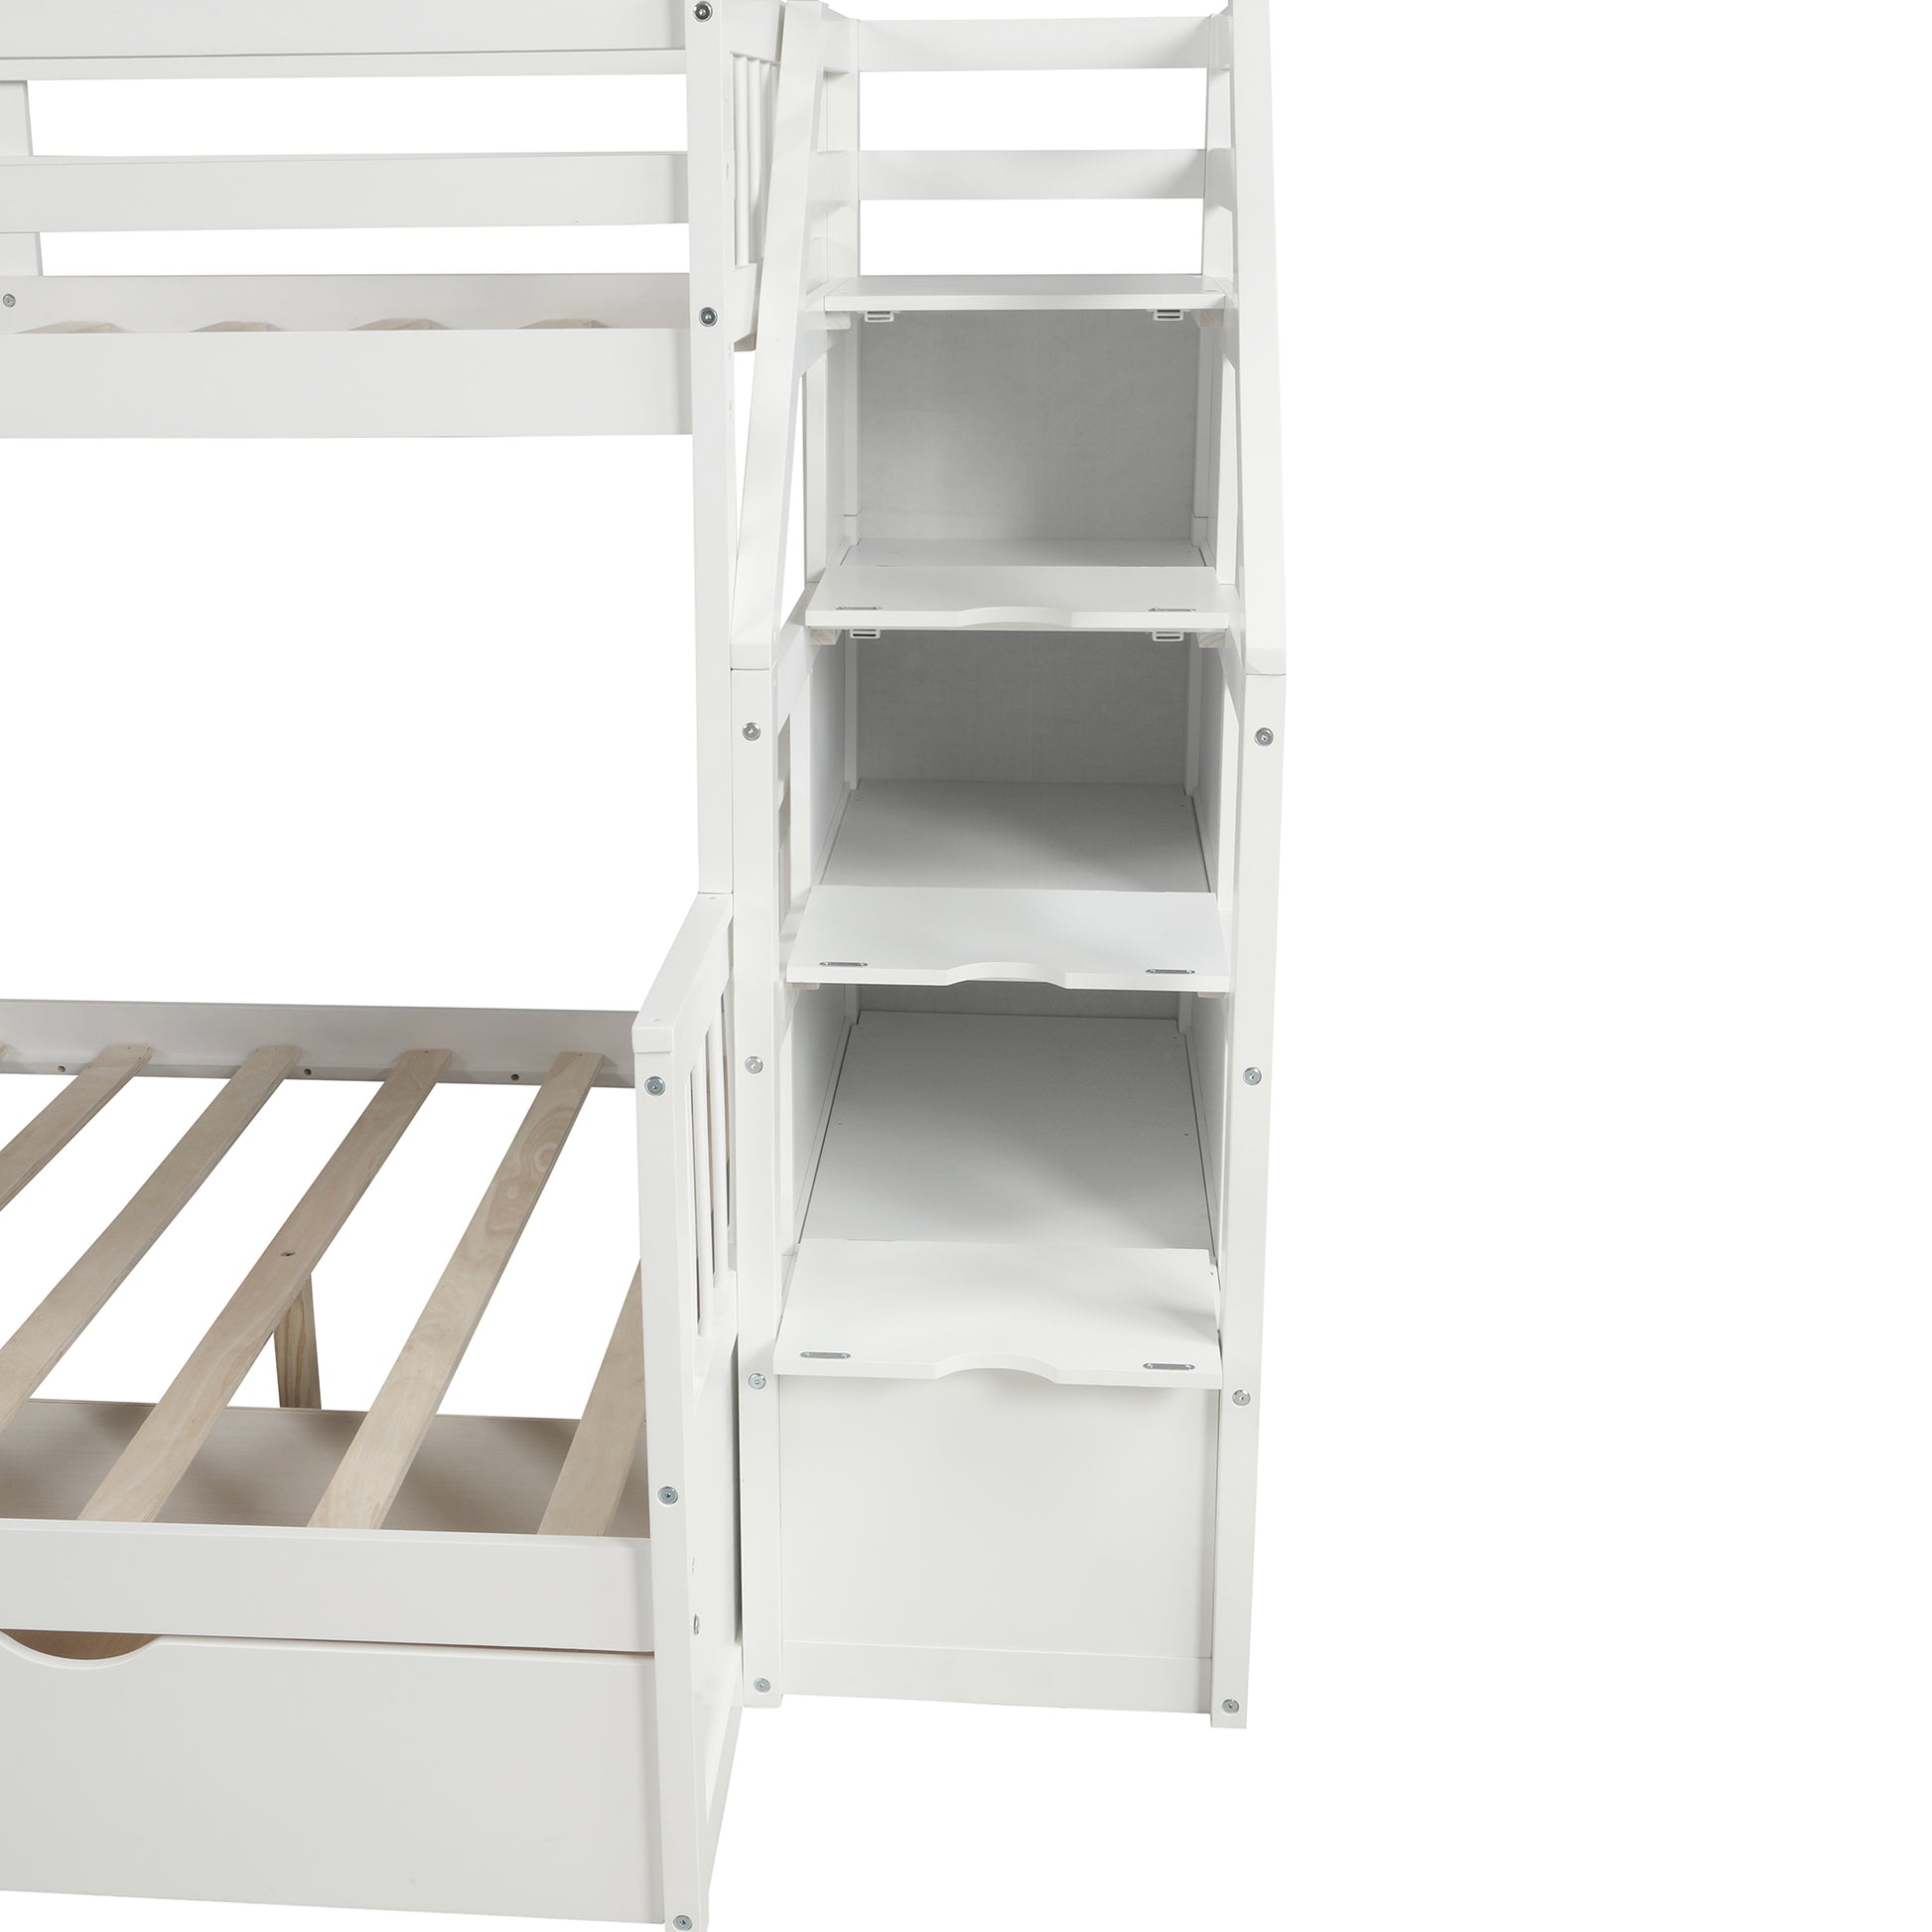 Twin over Full Bunk Bed with Drawers,Storage and Slide, Multifunction, White